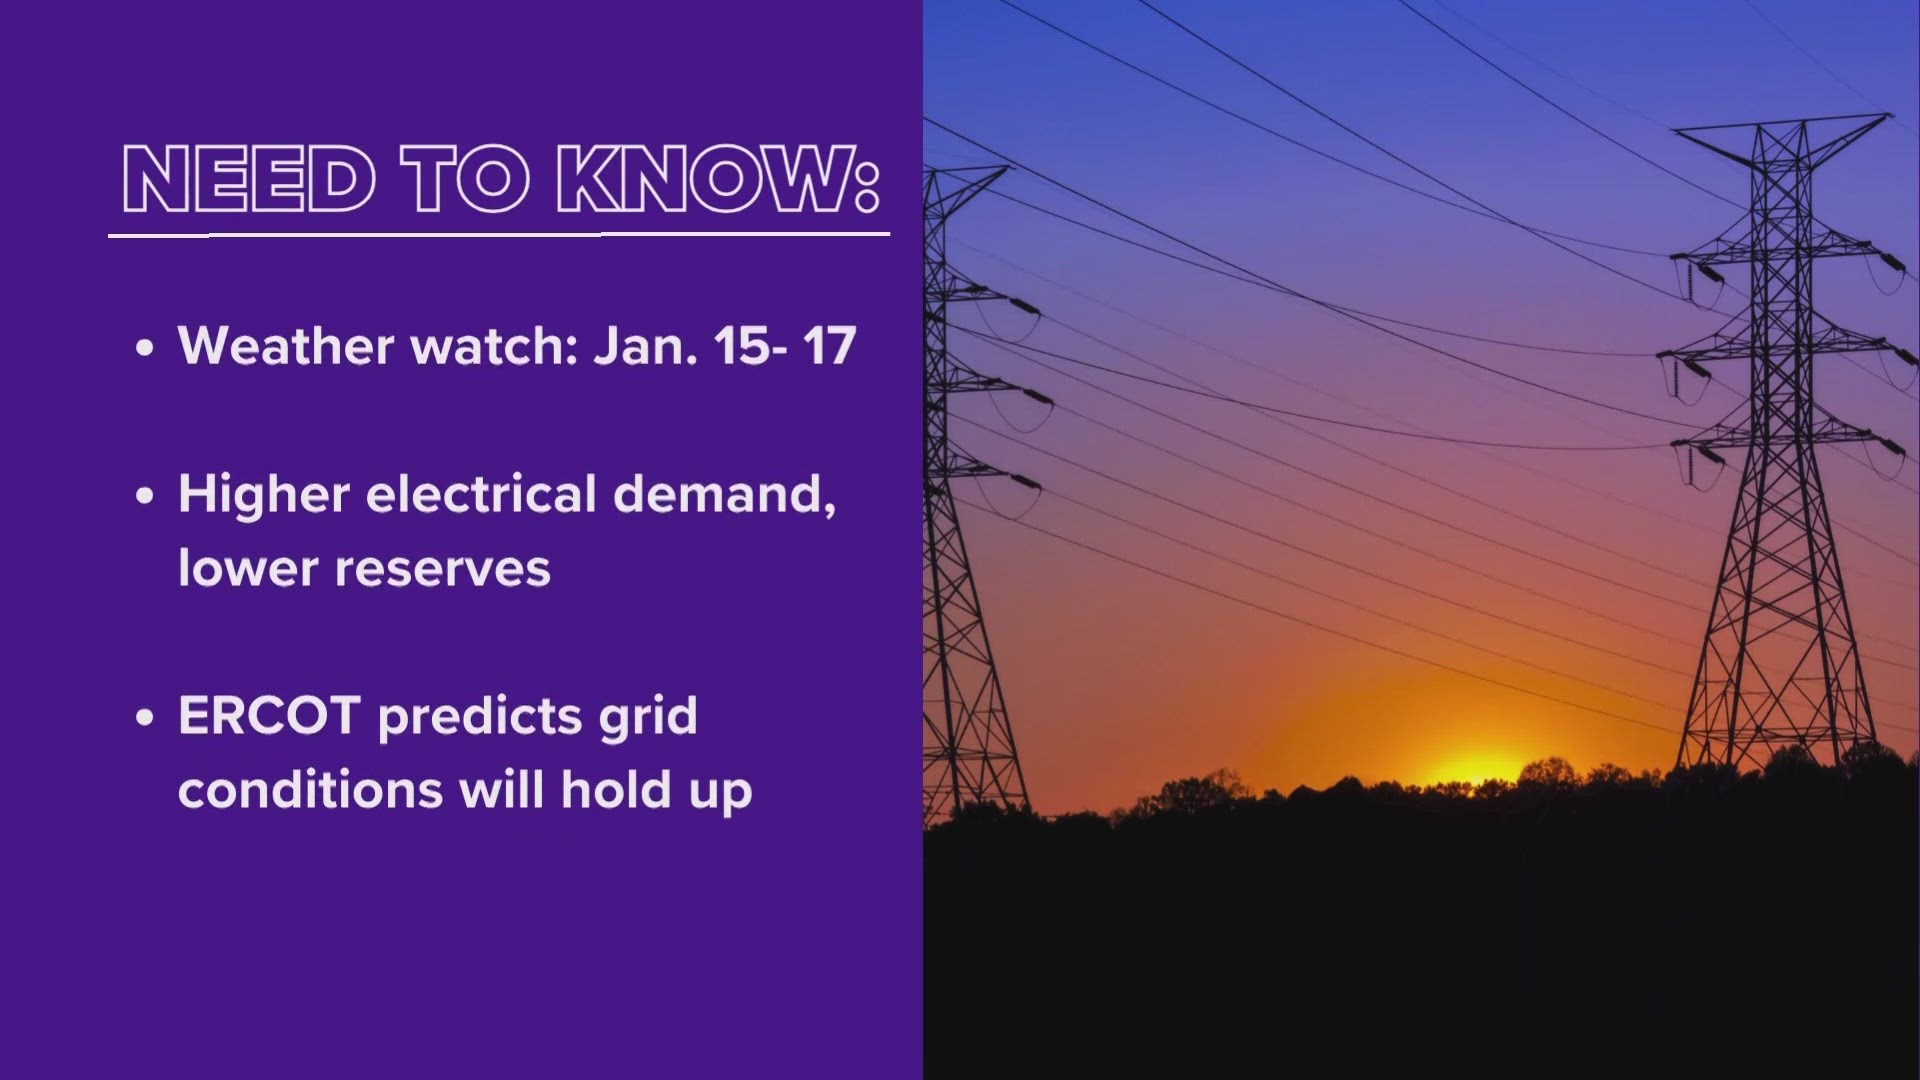 ERCOT is just watching for higher electrical demand and the potential for lower reserves.